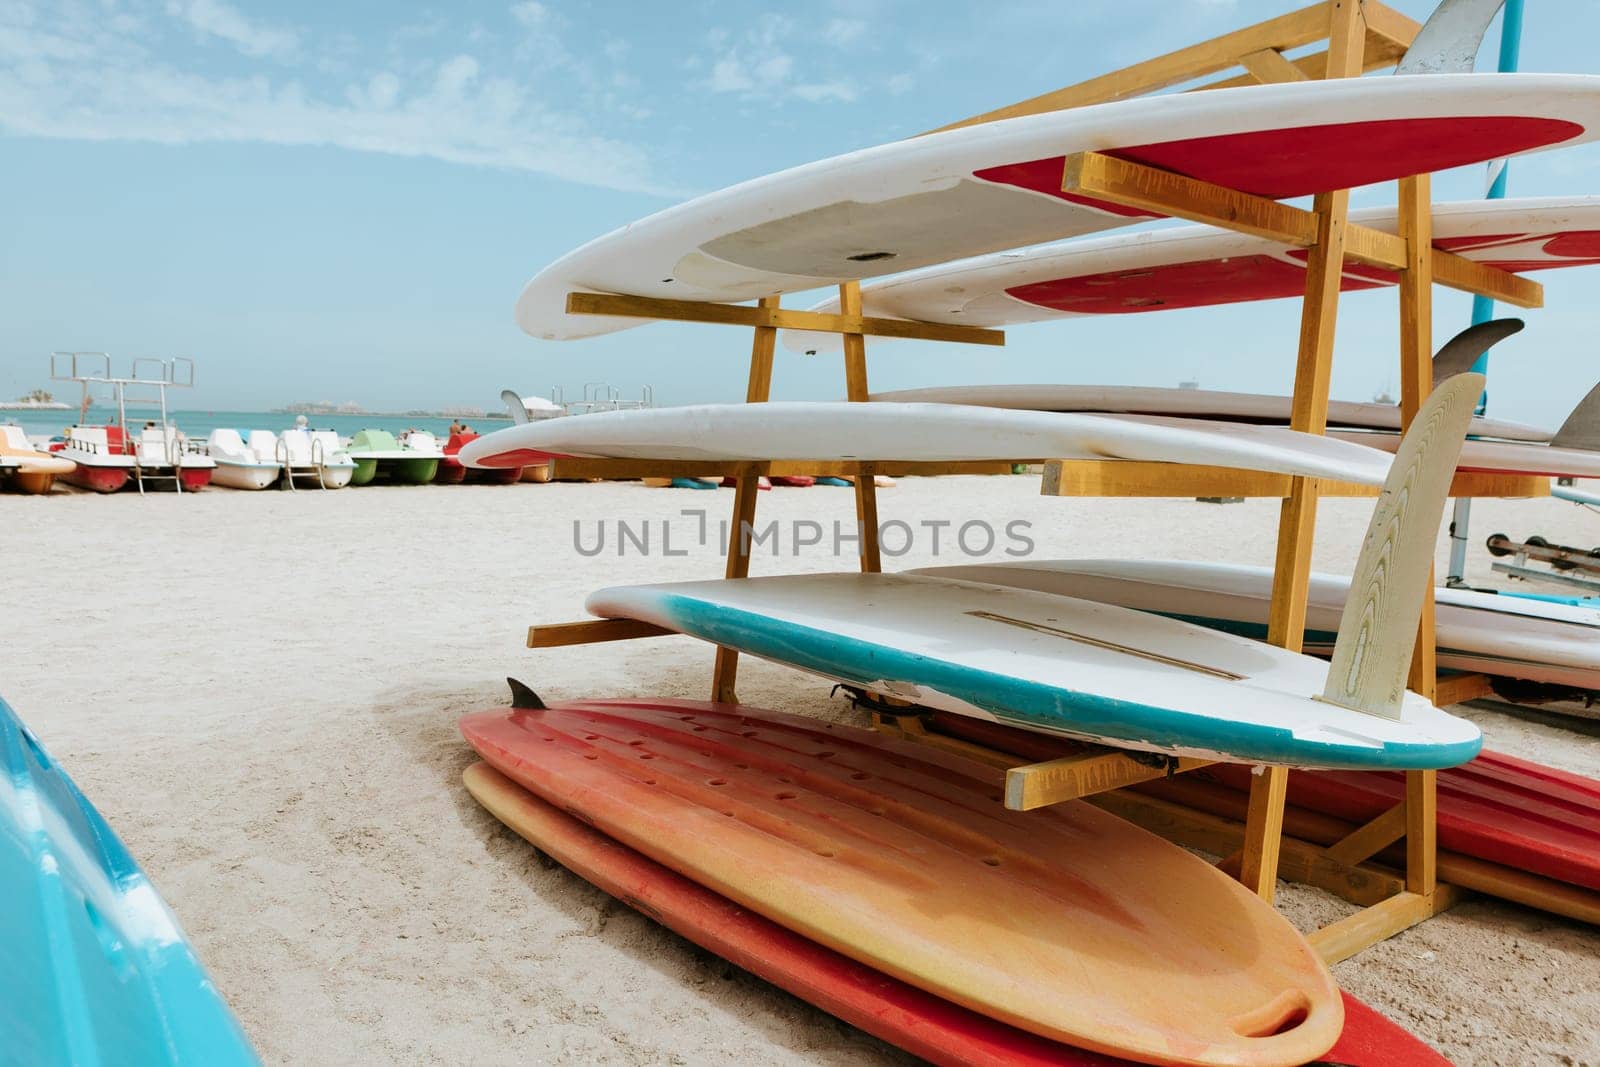 Surfboards stacked on the rack on a beach by Fabrikasimf